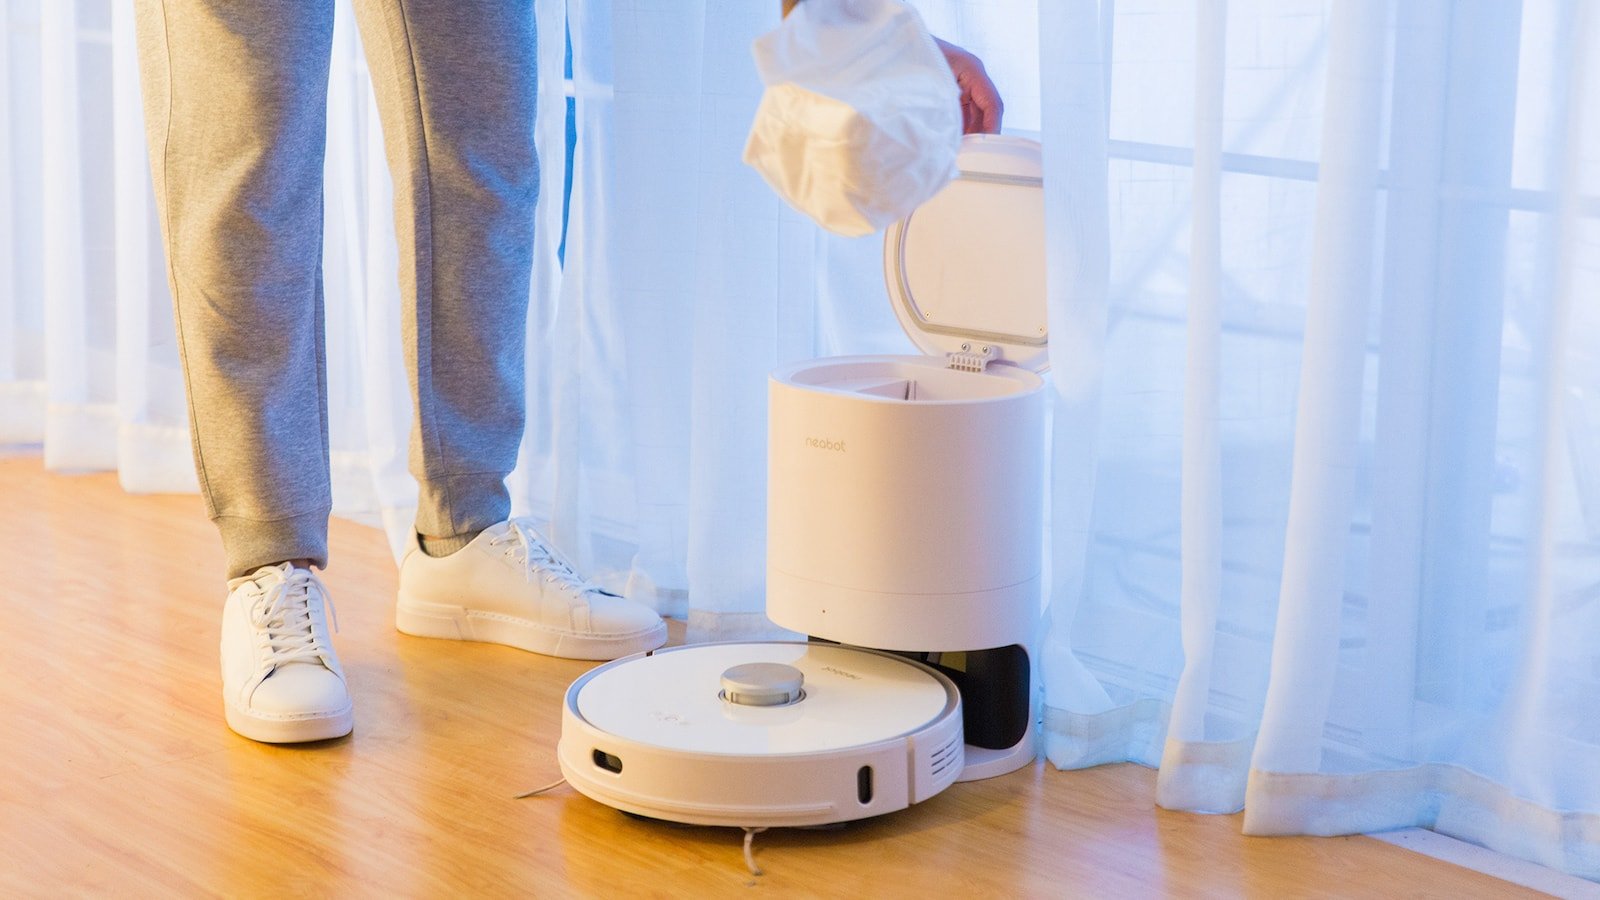 Neabot NoMo N1 Plus 2-in-1 robot vacuum mops & vacuums simultaneously for spotless floors